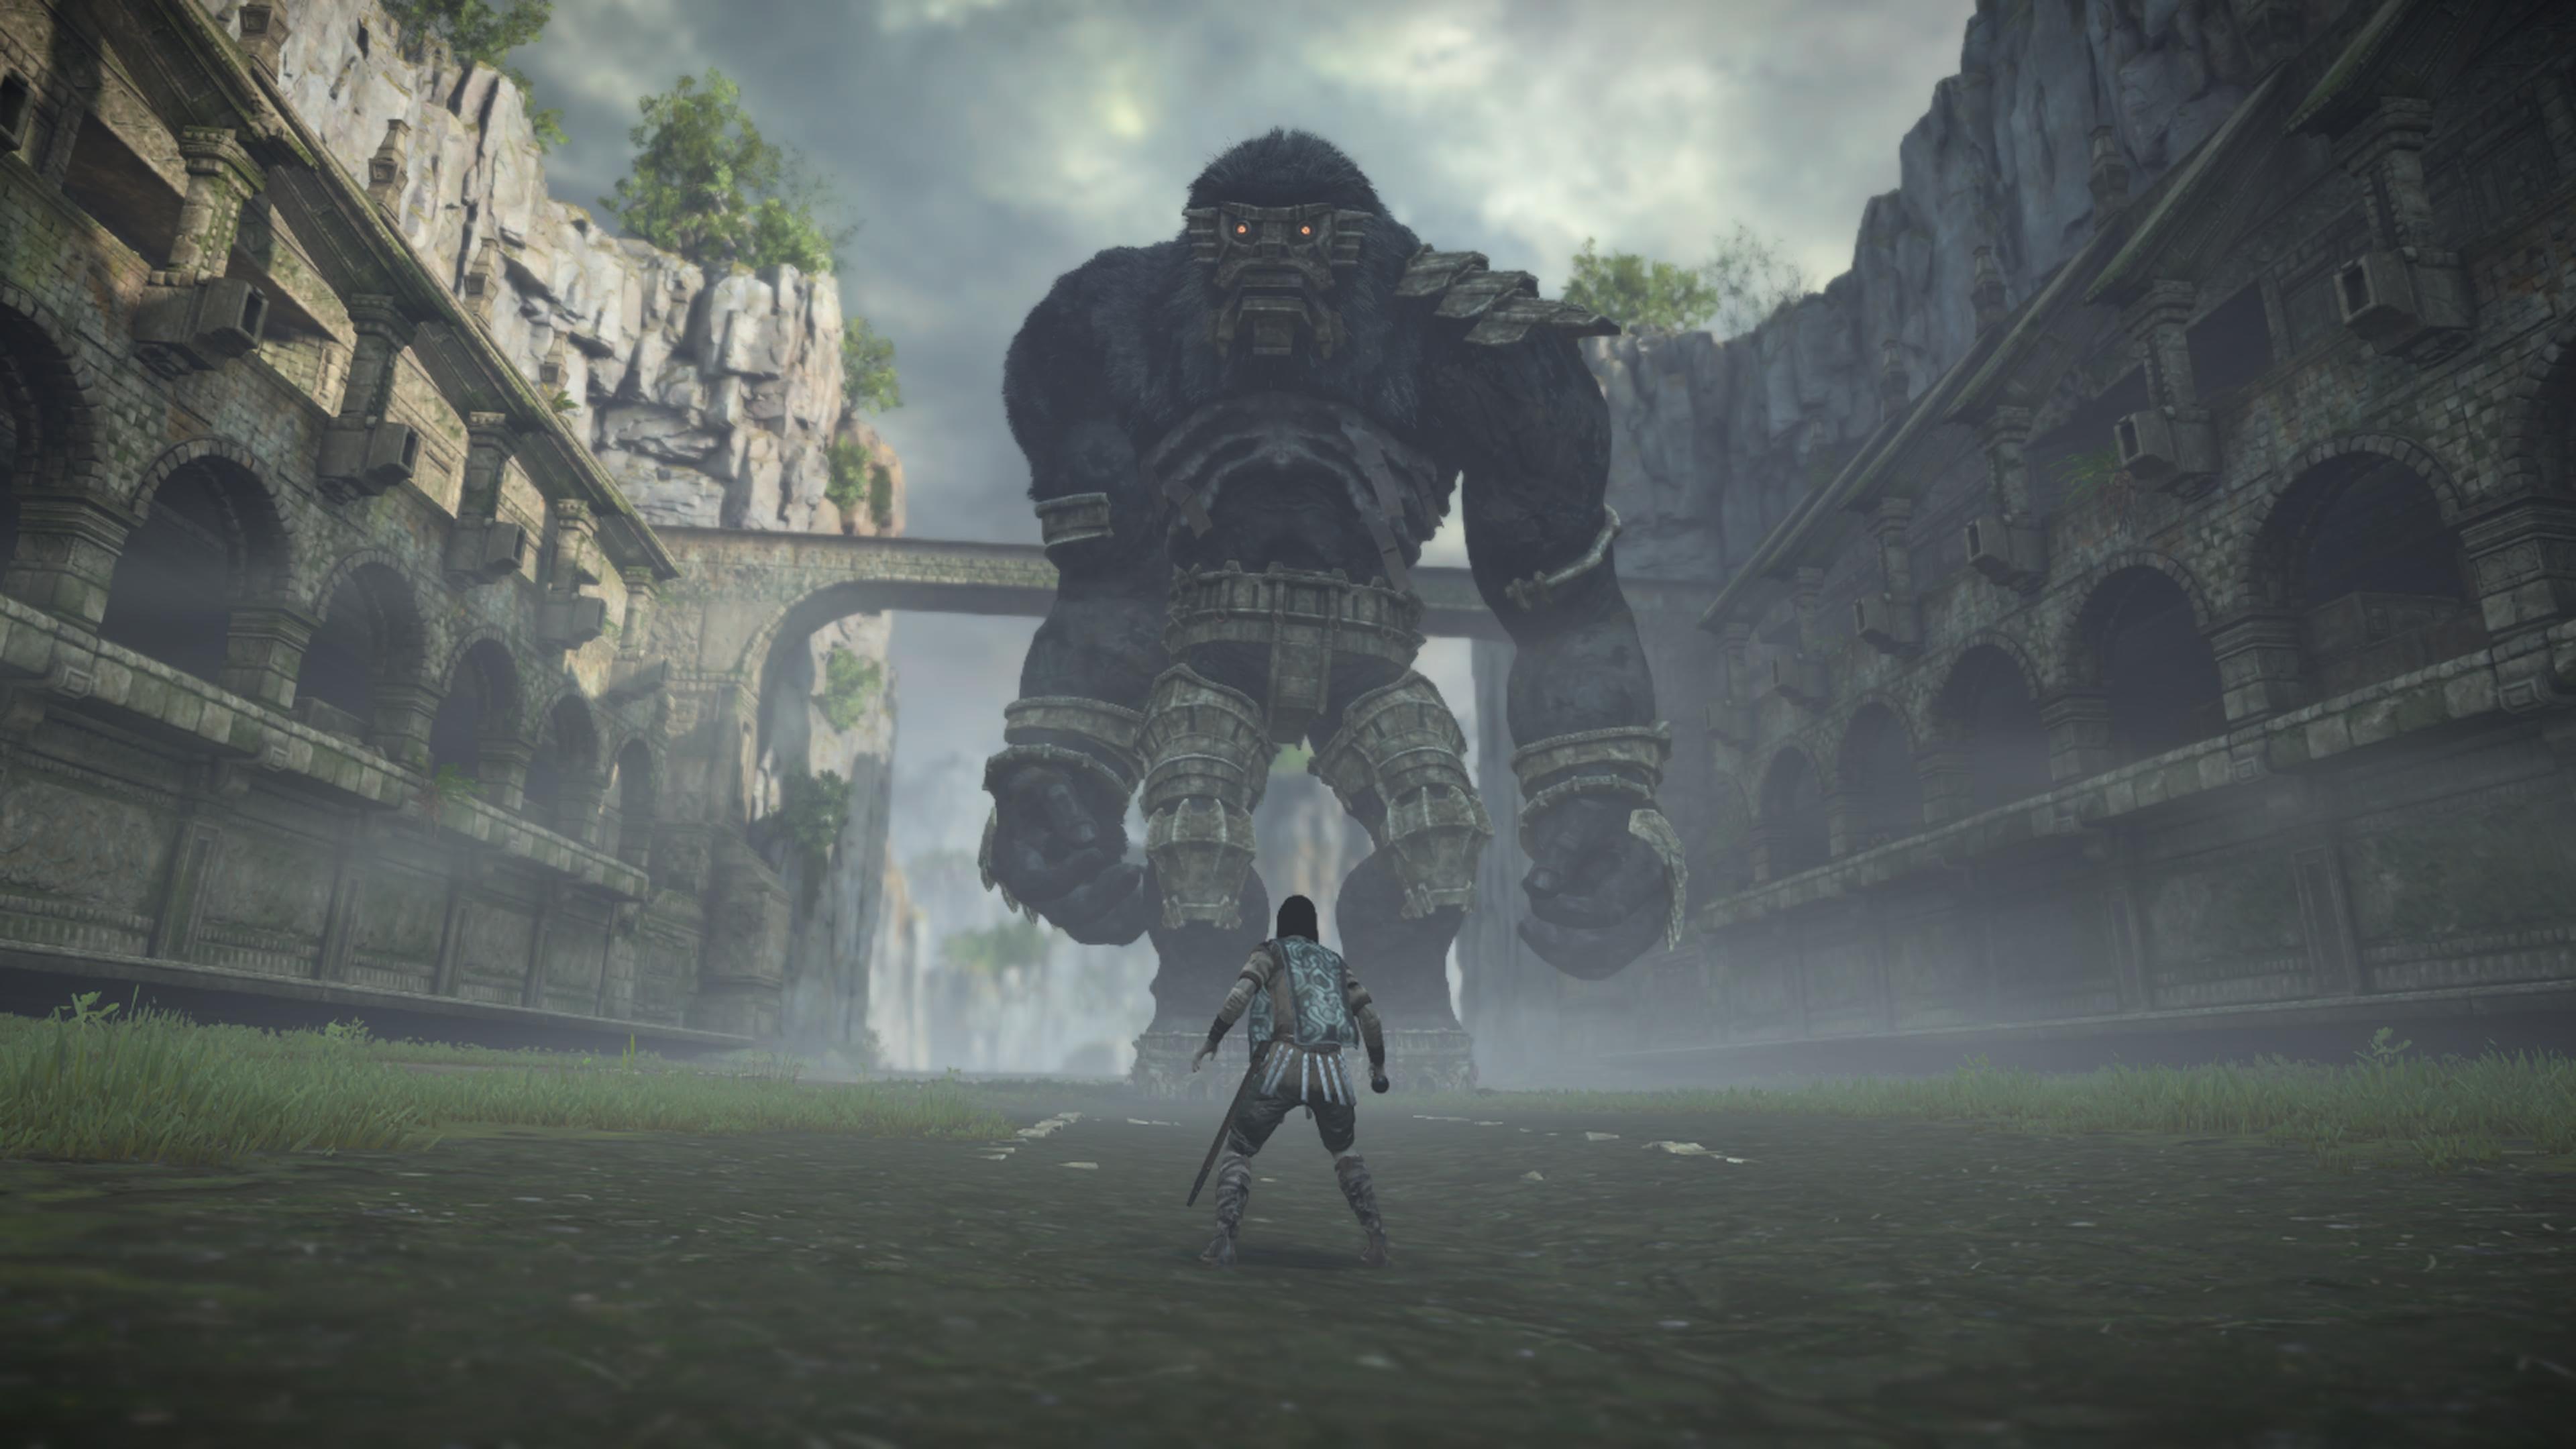 Shadow Of The Colossus Wander PlayStation Playstation 5 Video Games Video Game Art Screen Shot Creat 3840x2160